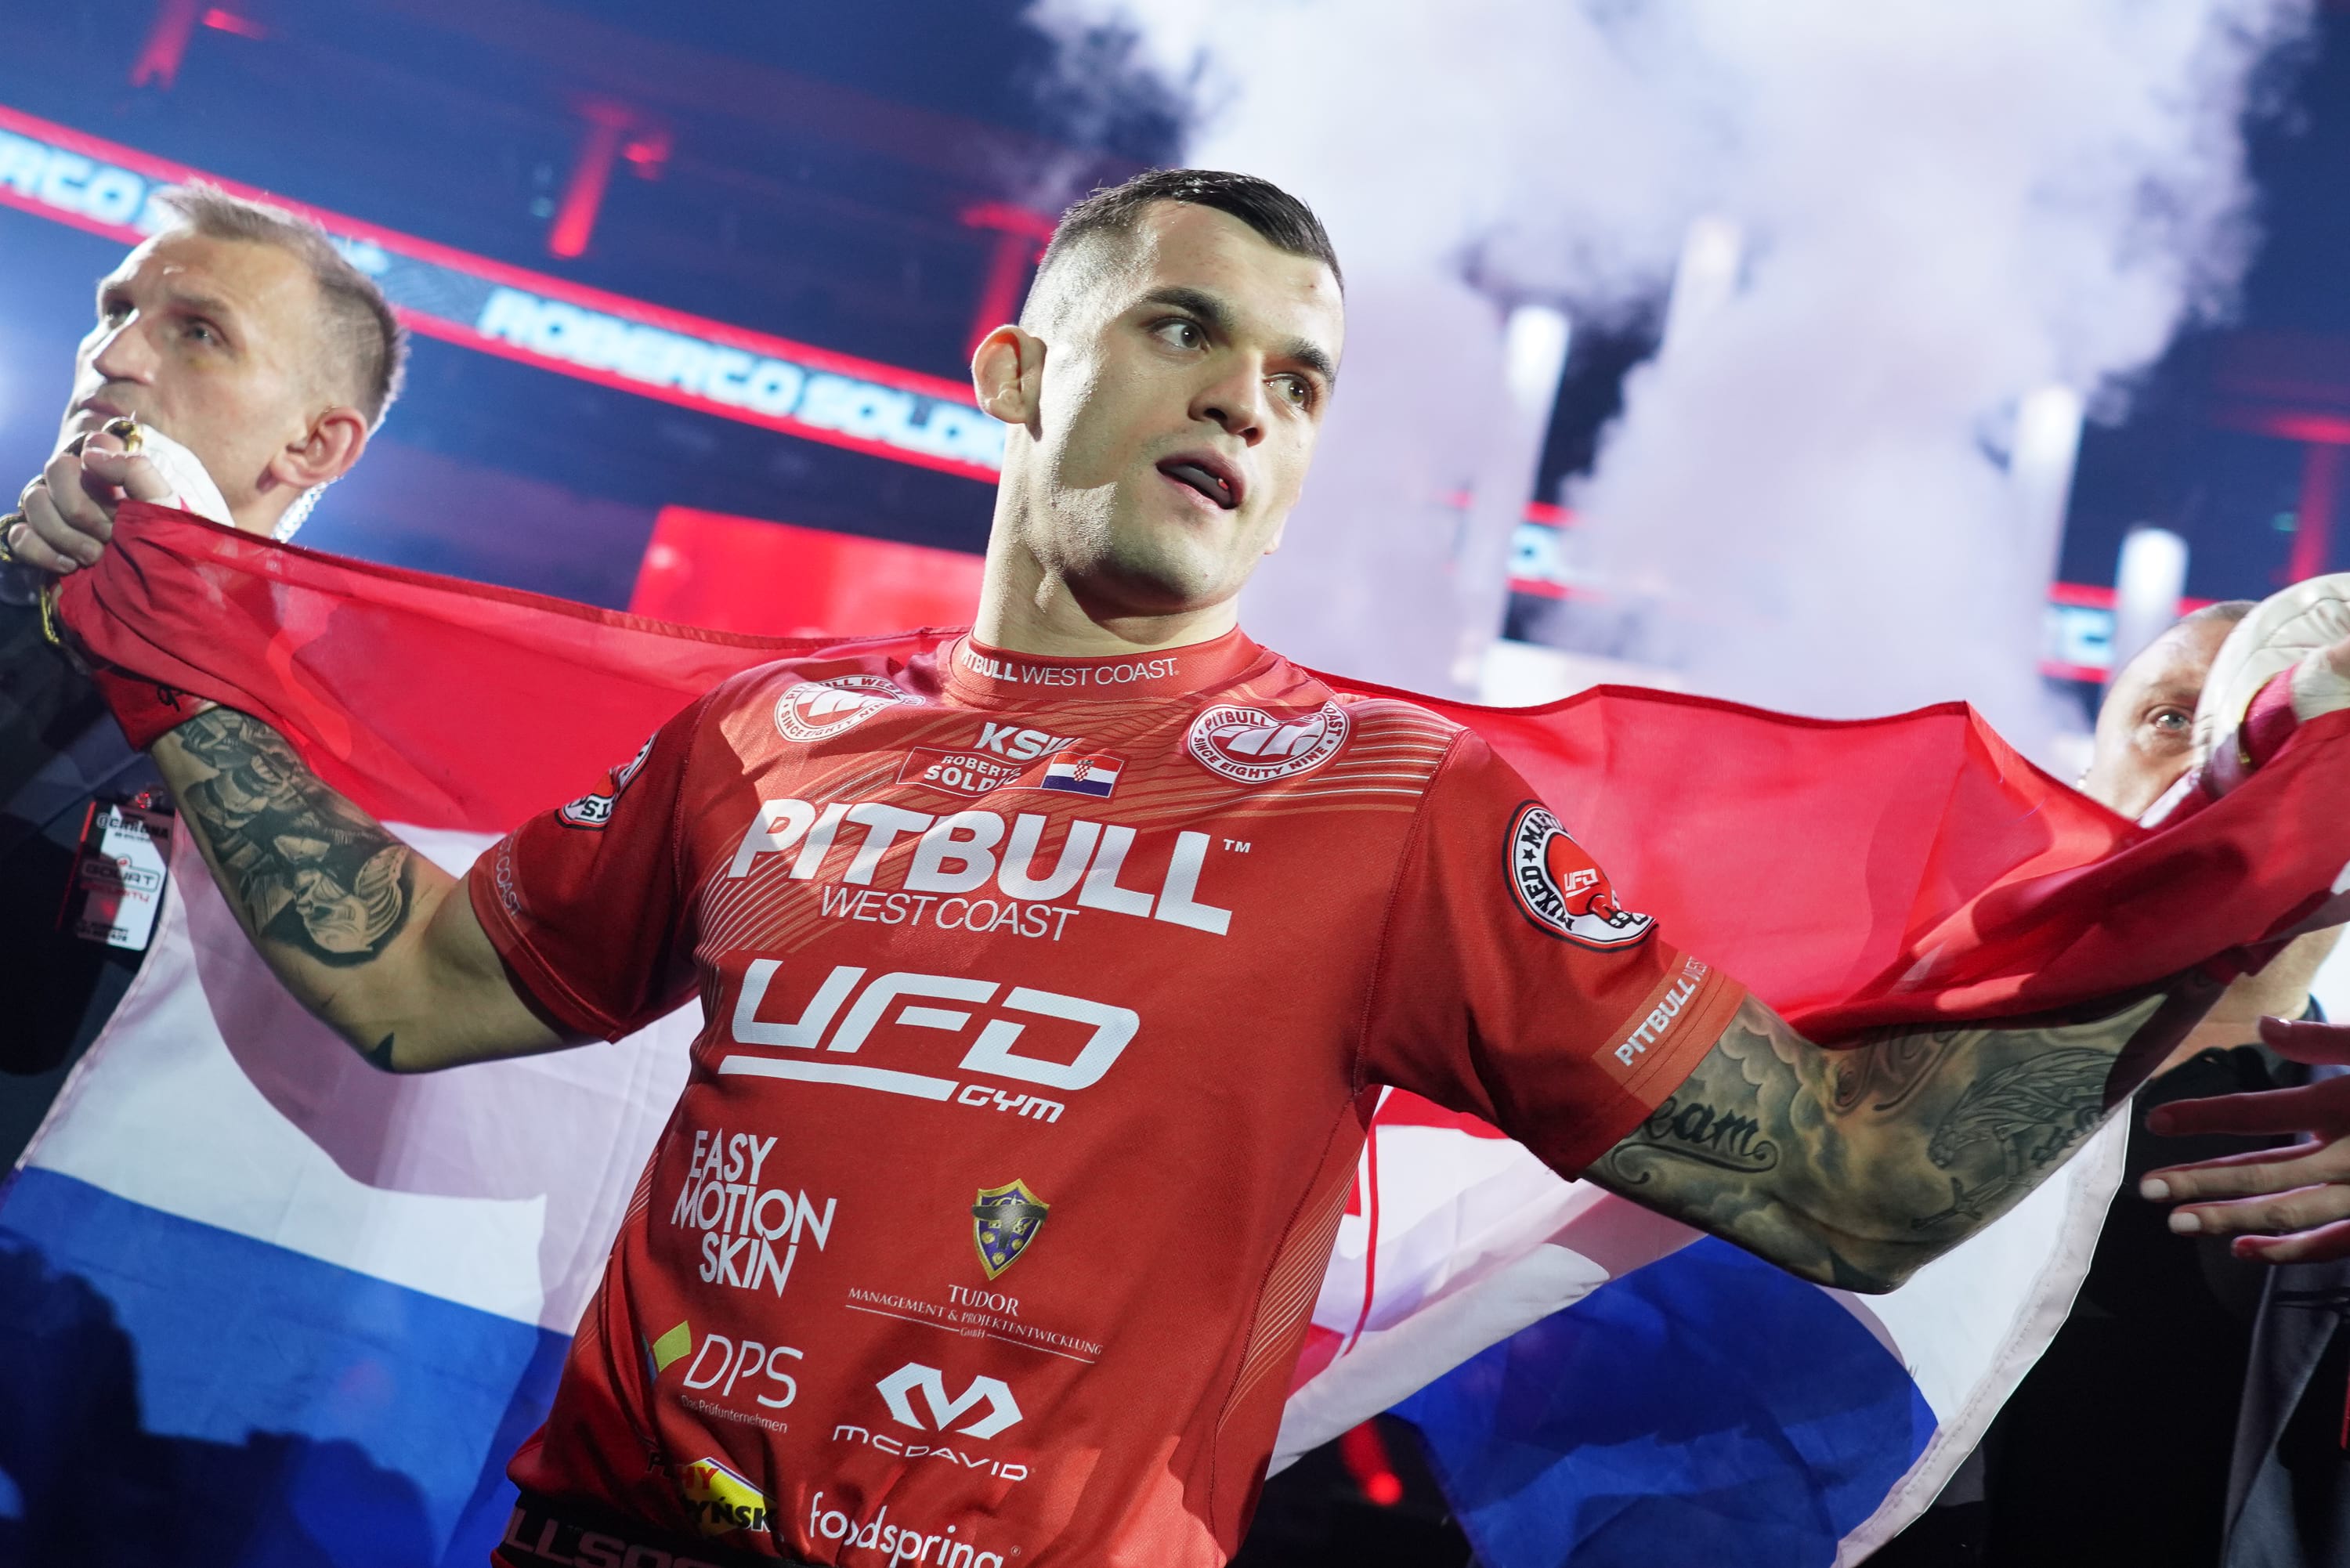 Roberto Soldic has a new opponent after Patrik Kincl was forced out with injury KSW 50 London SSE Arena Wembley Croatia MMA